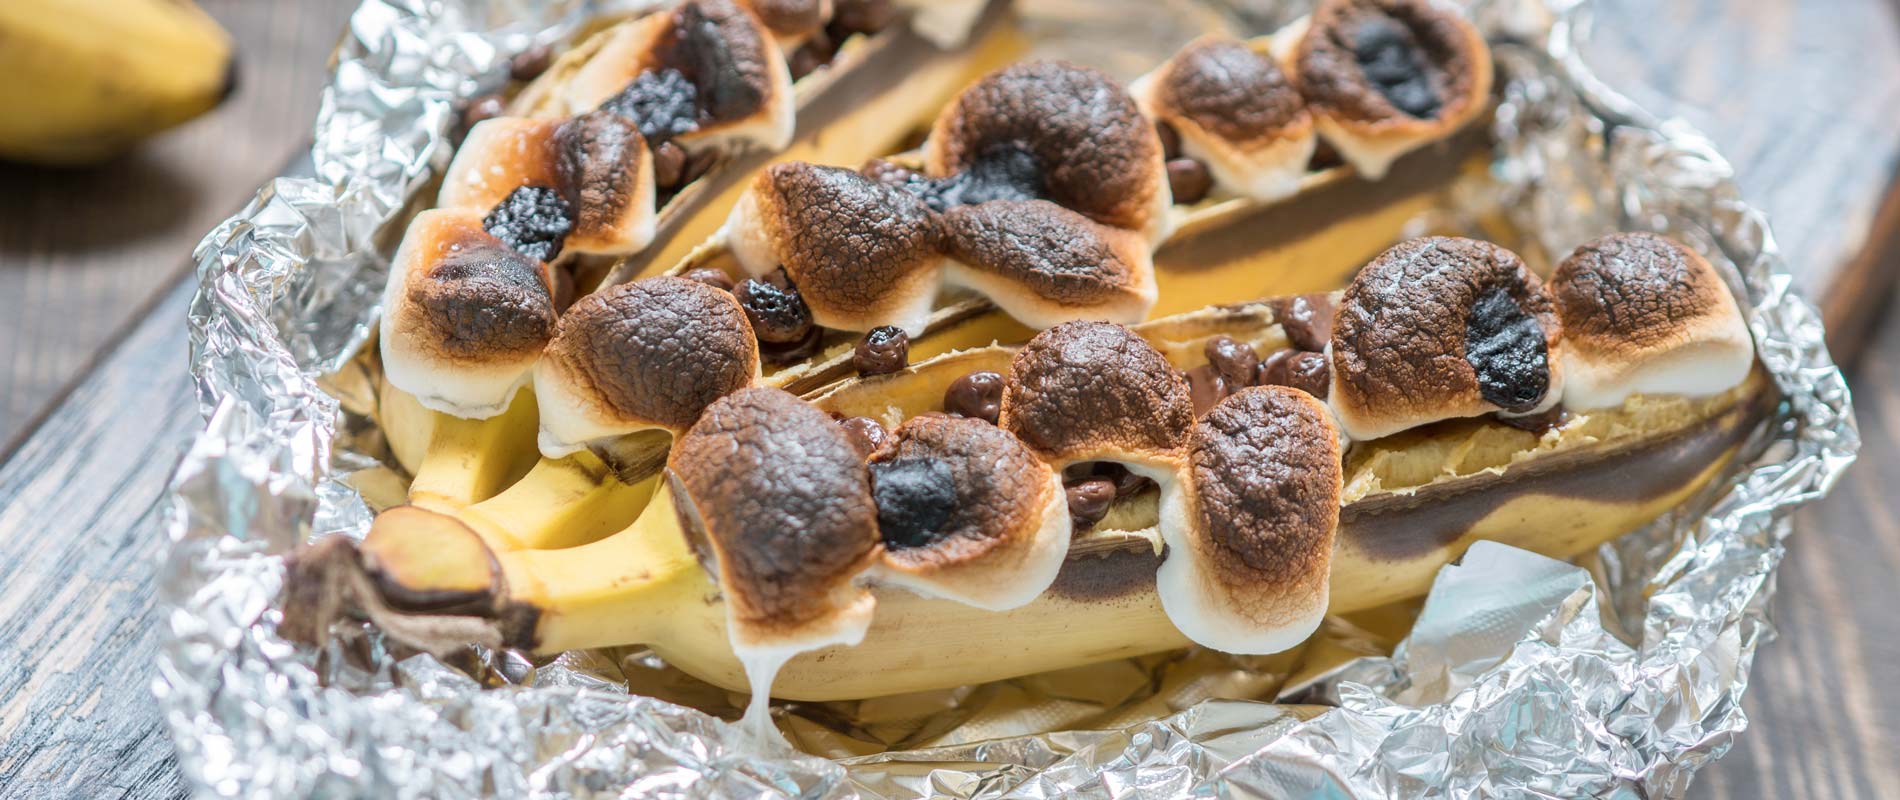 Banana S'mores: popular banana and marshmallow dessert wrapped in tin foil